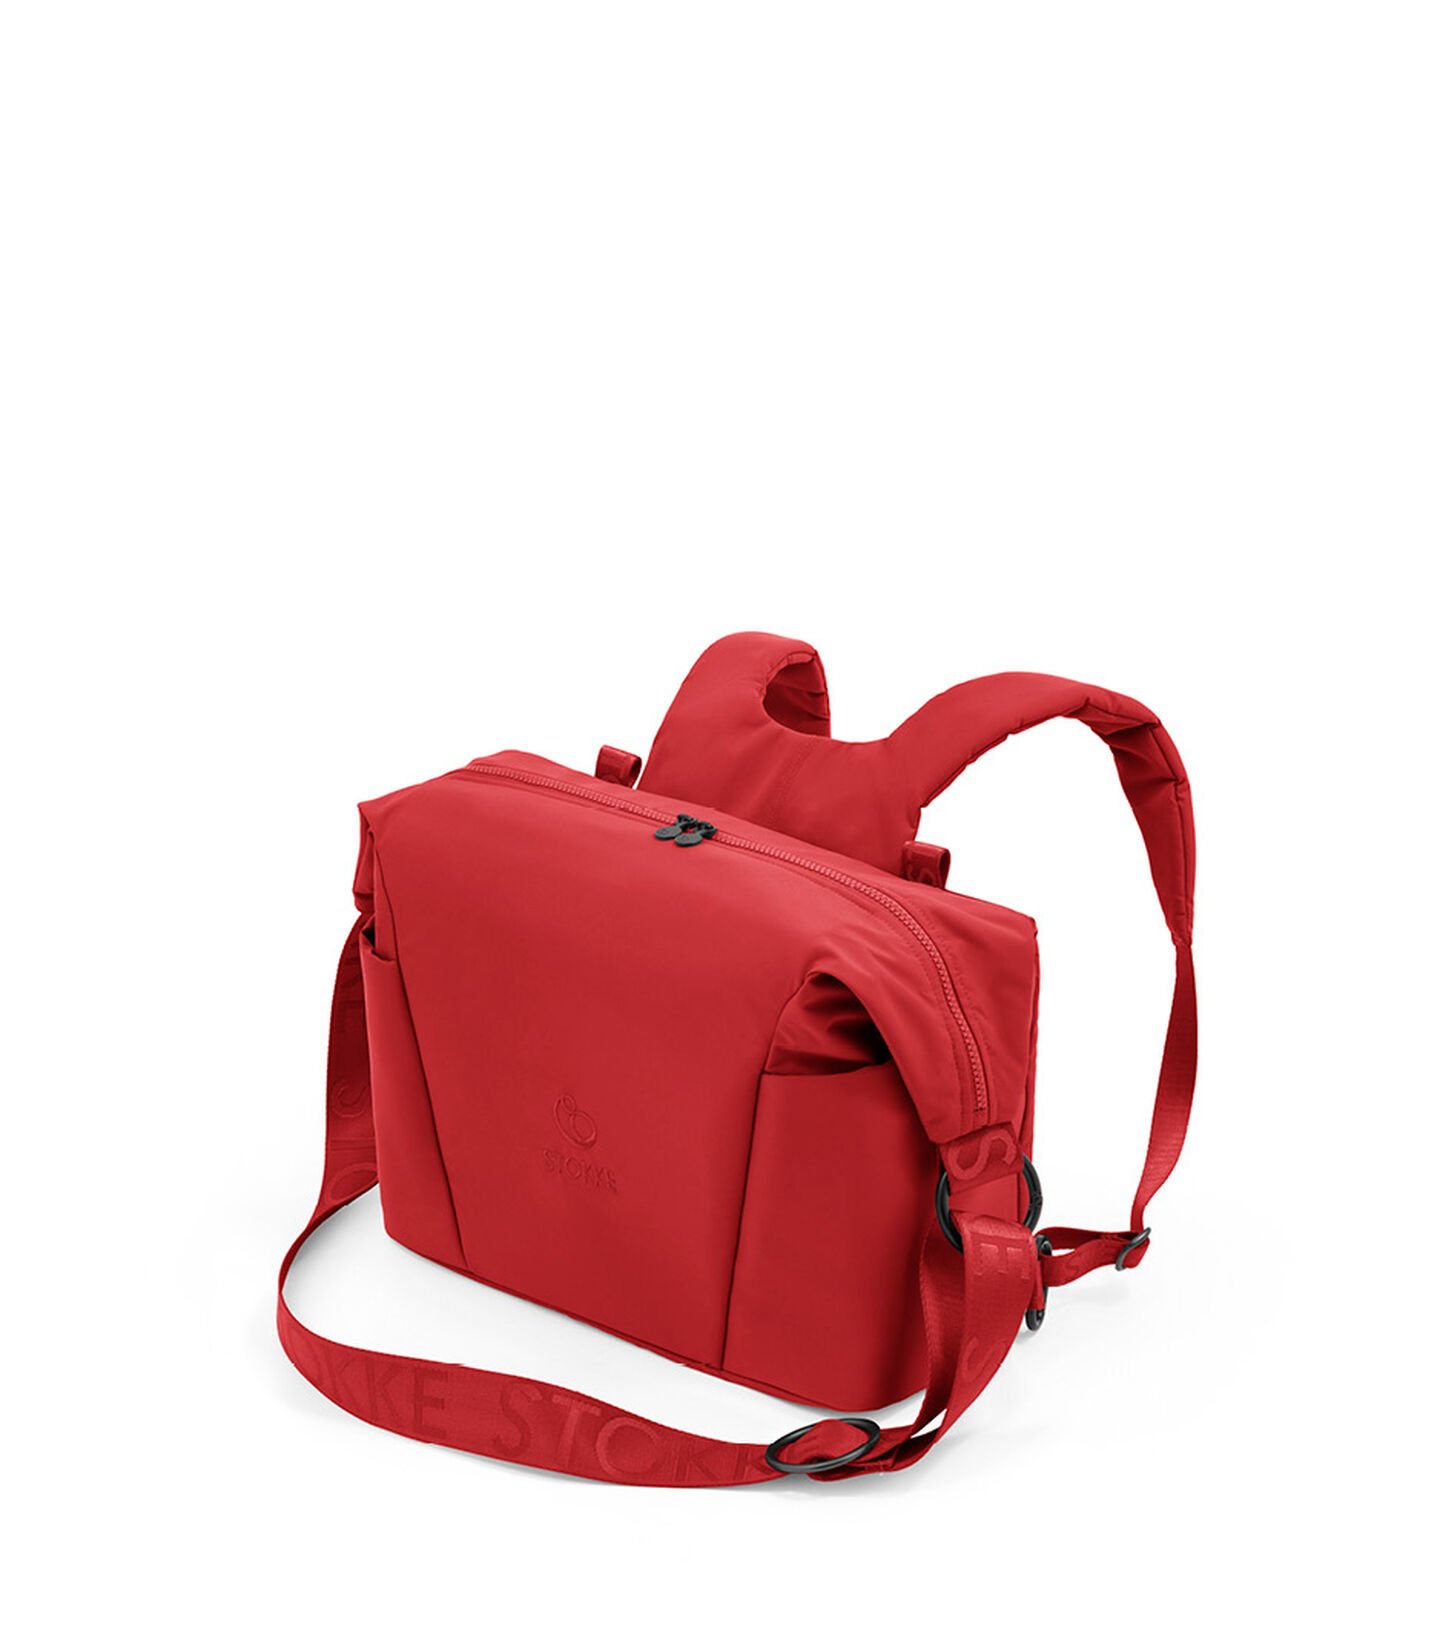 Stokke® Xplory® X Changing bag Ruby Red, Ruby Red, mainview view 1